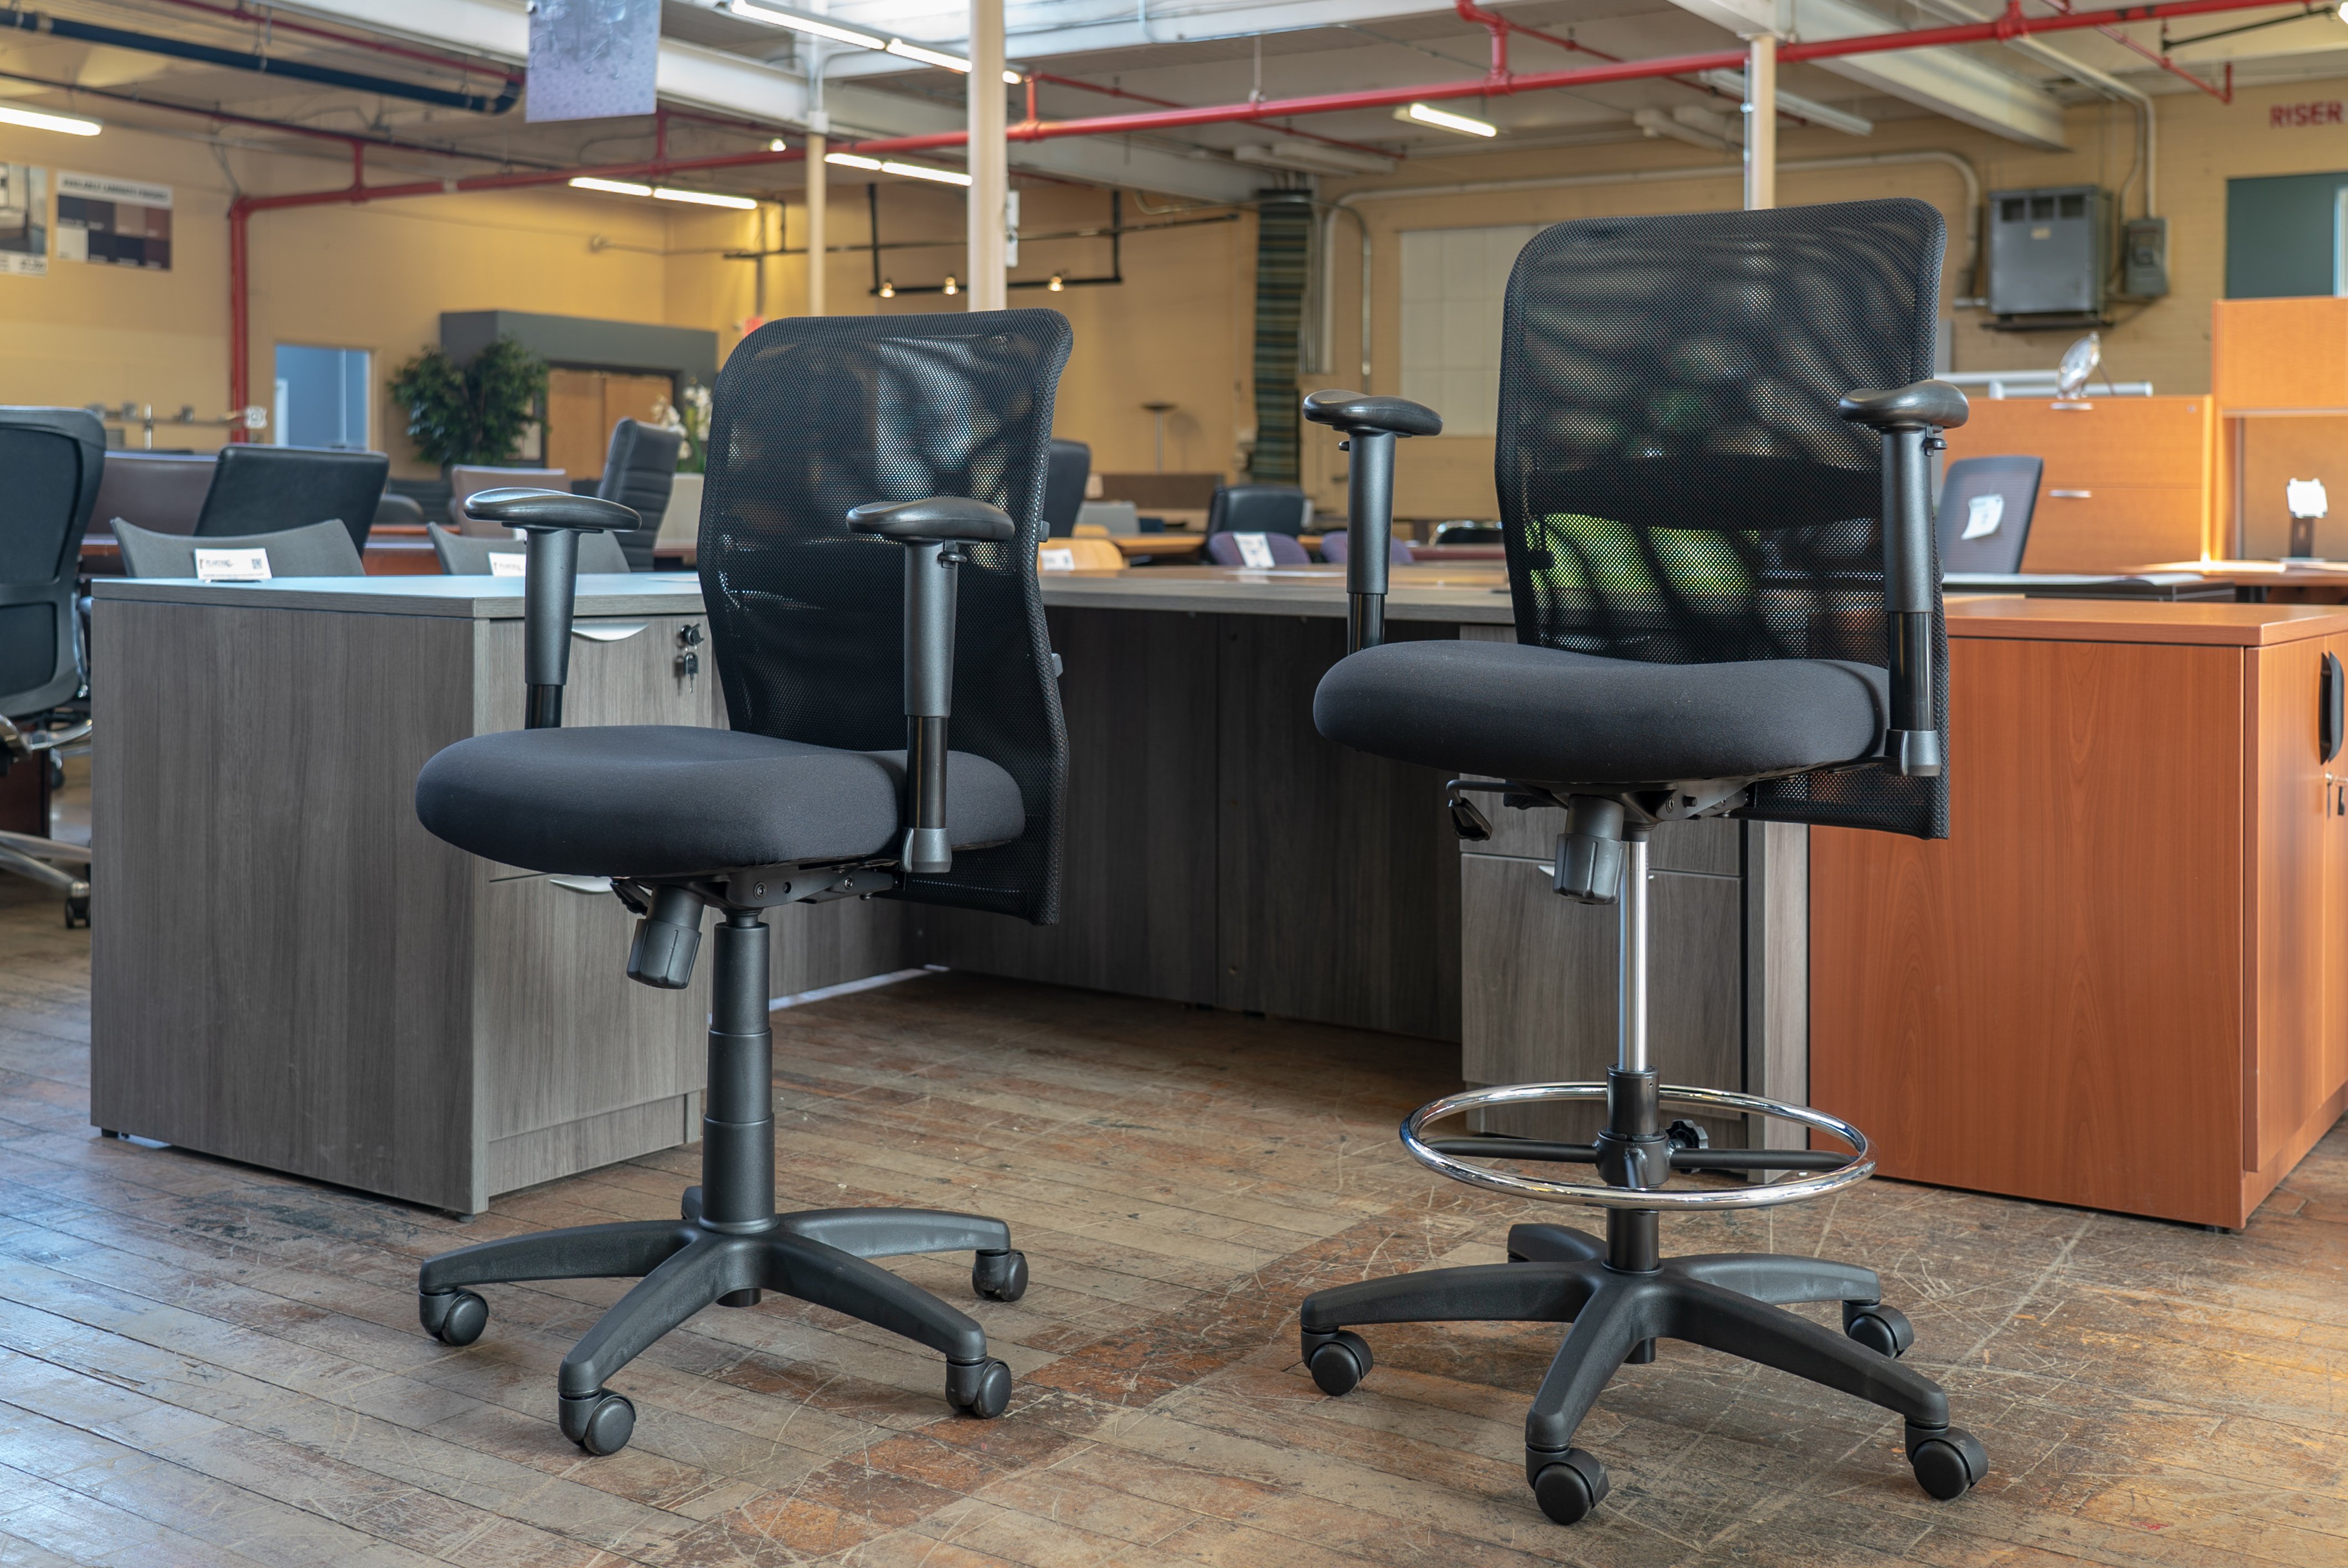 peartree-office-action-720-mesh-back-task-chairs